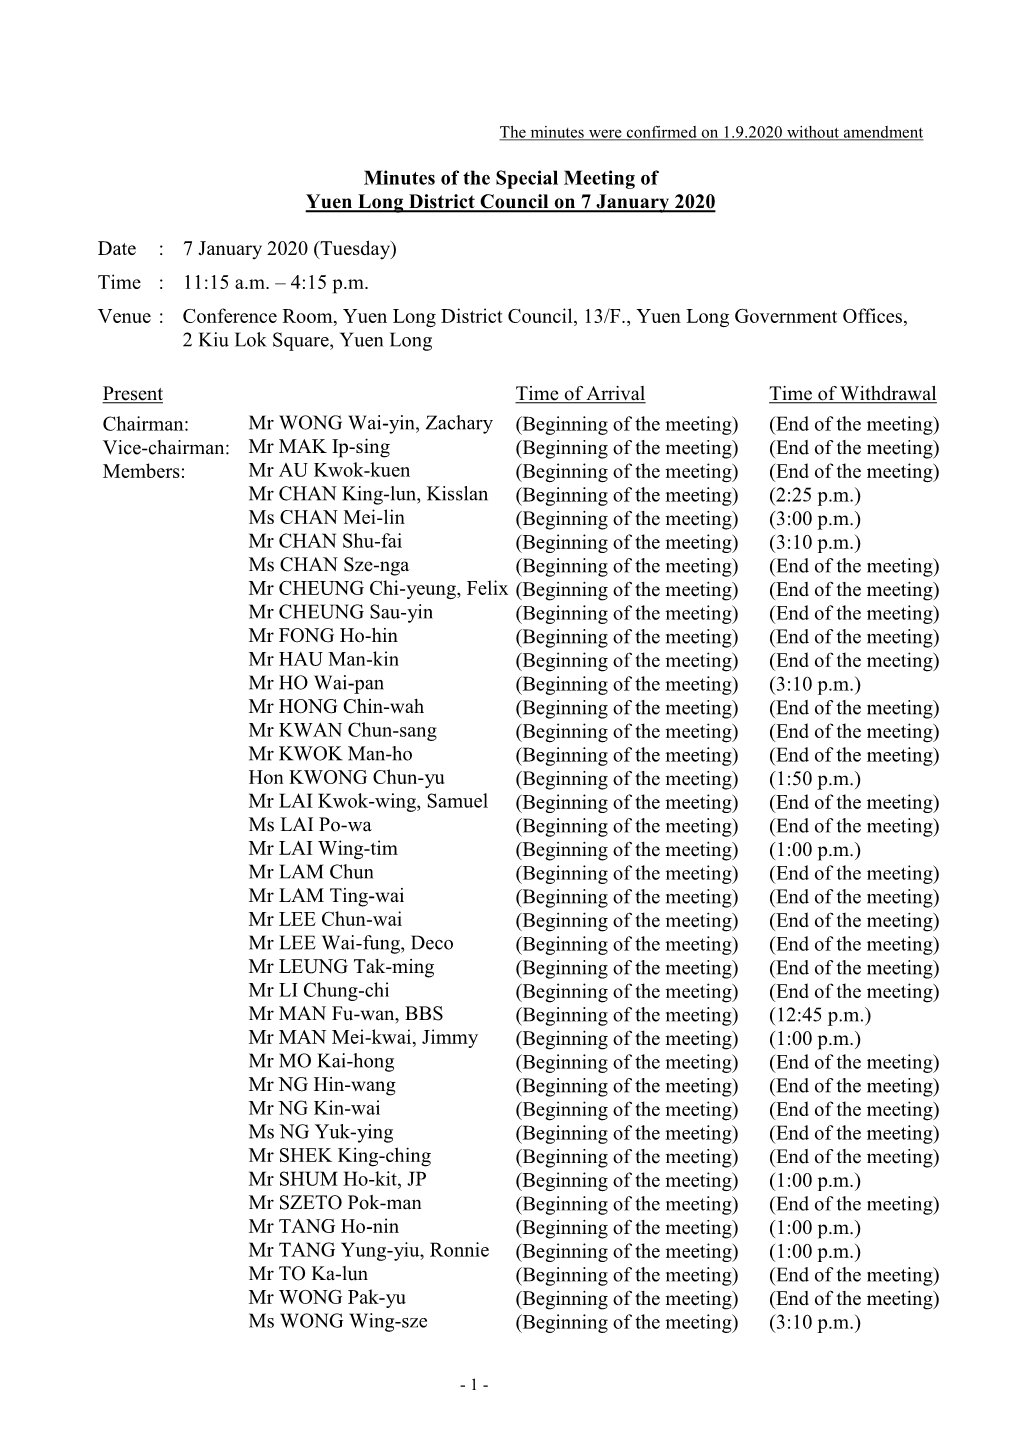 Minutes of the Special Meeting of Yuen Long District Council on 7 January 2020